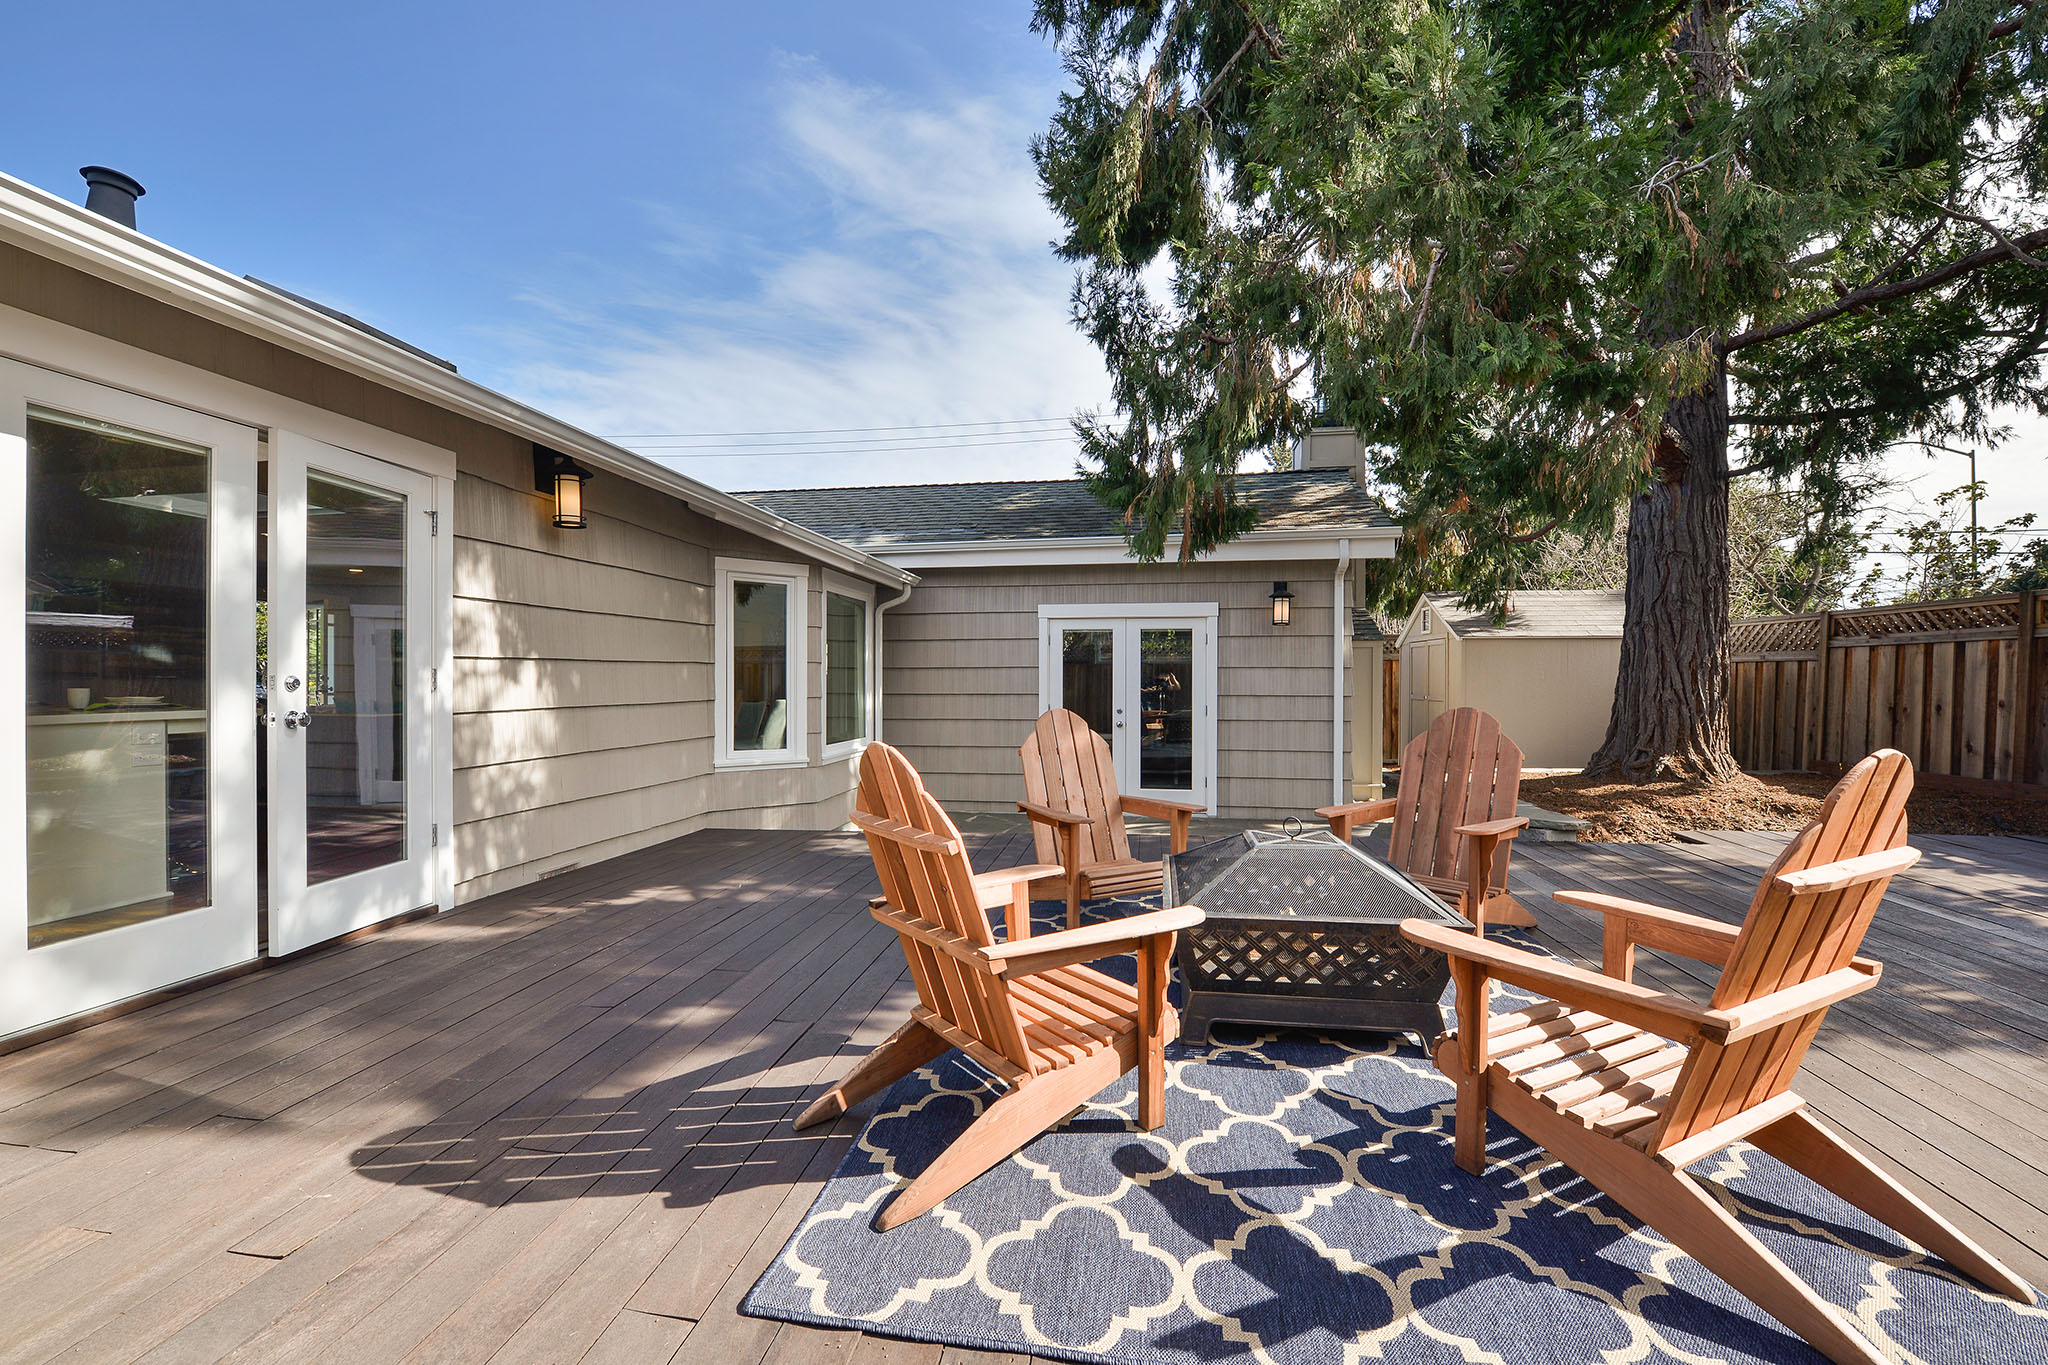 Image number 4 for slideshow of 223 Vincent Drive | Mountain View, CA 94041 |